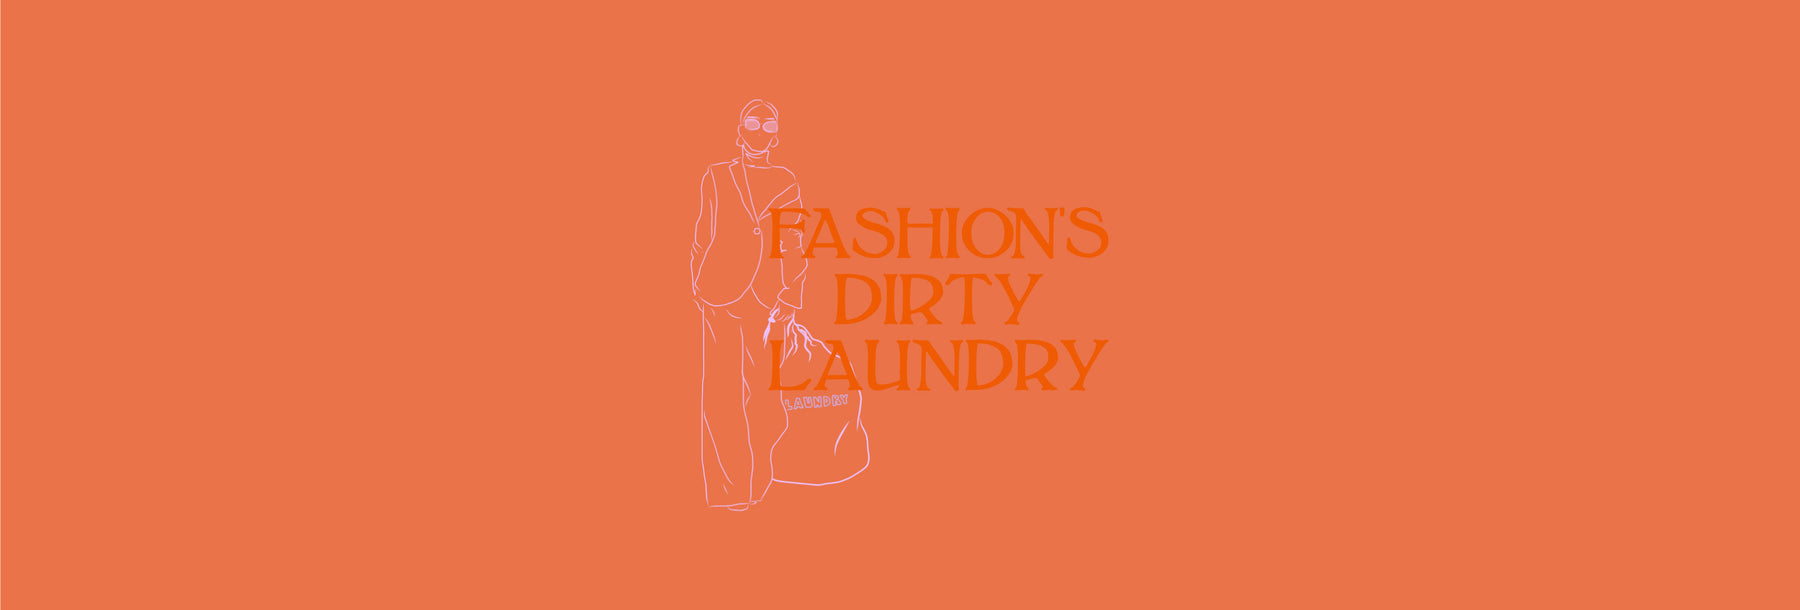 Fashion's Dirty Laundry: Waste